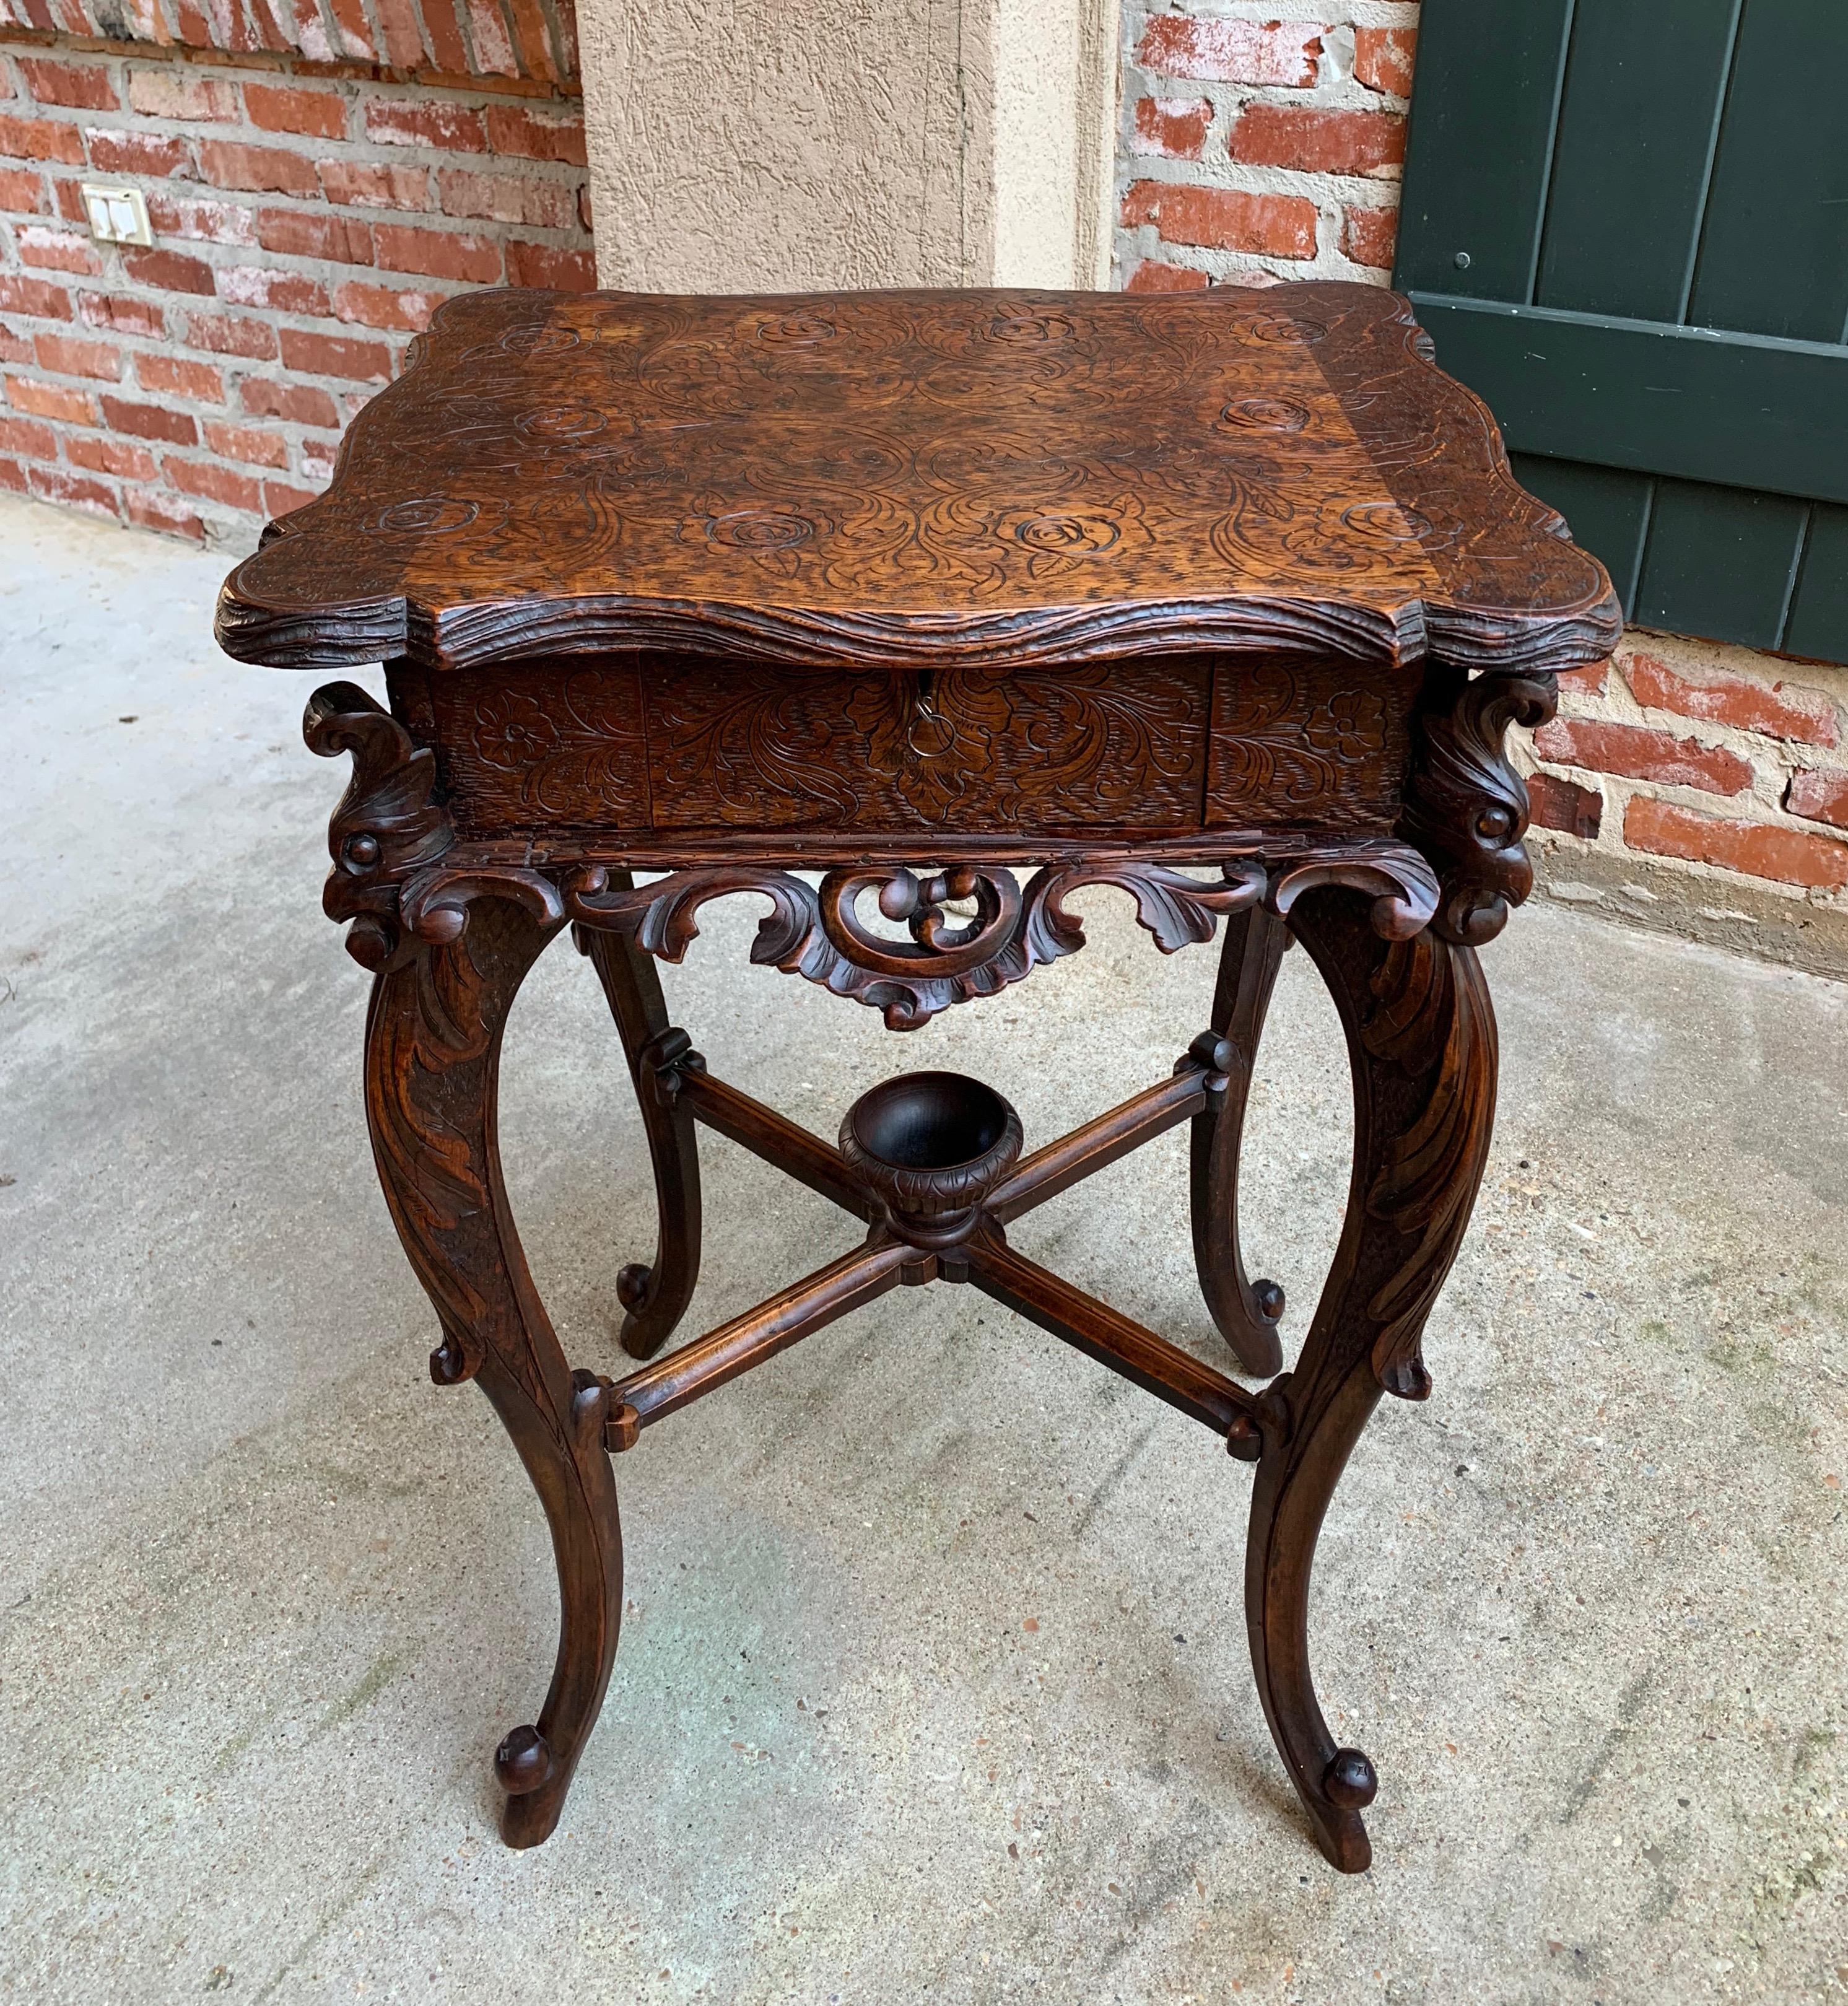 ~Direct from France~
Unique, highly carved antique French table with exquisite details throughout!~
~The overall silhouette is stunning, from the serpentine edge top to the figural side trim, elongated legs and center cross stretcher with decorative